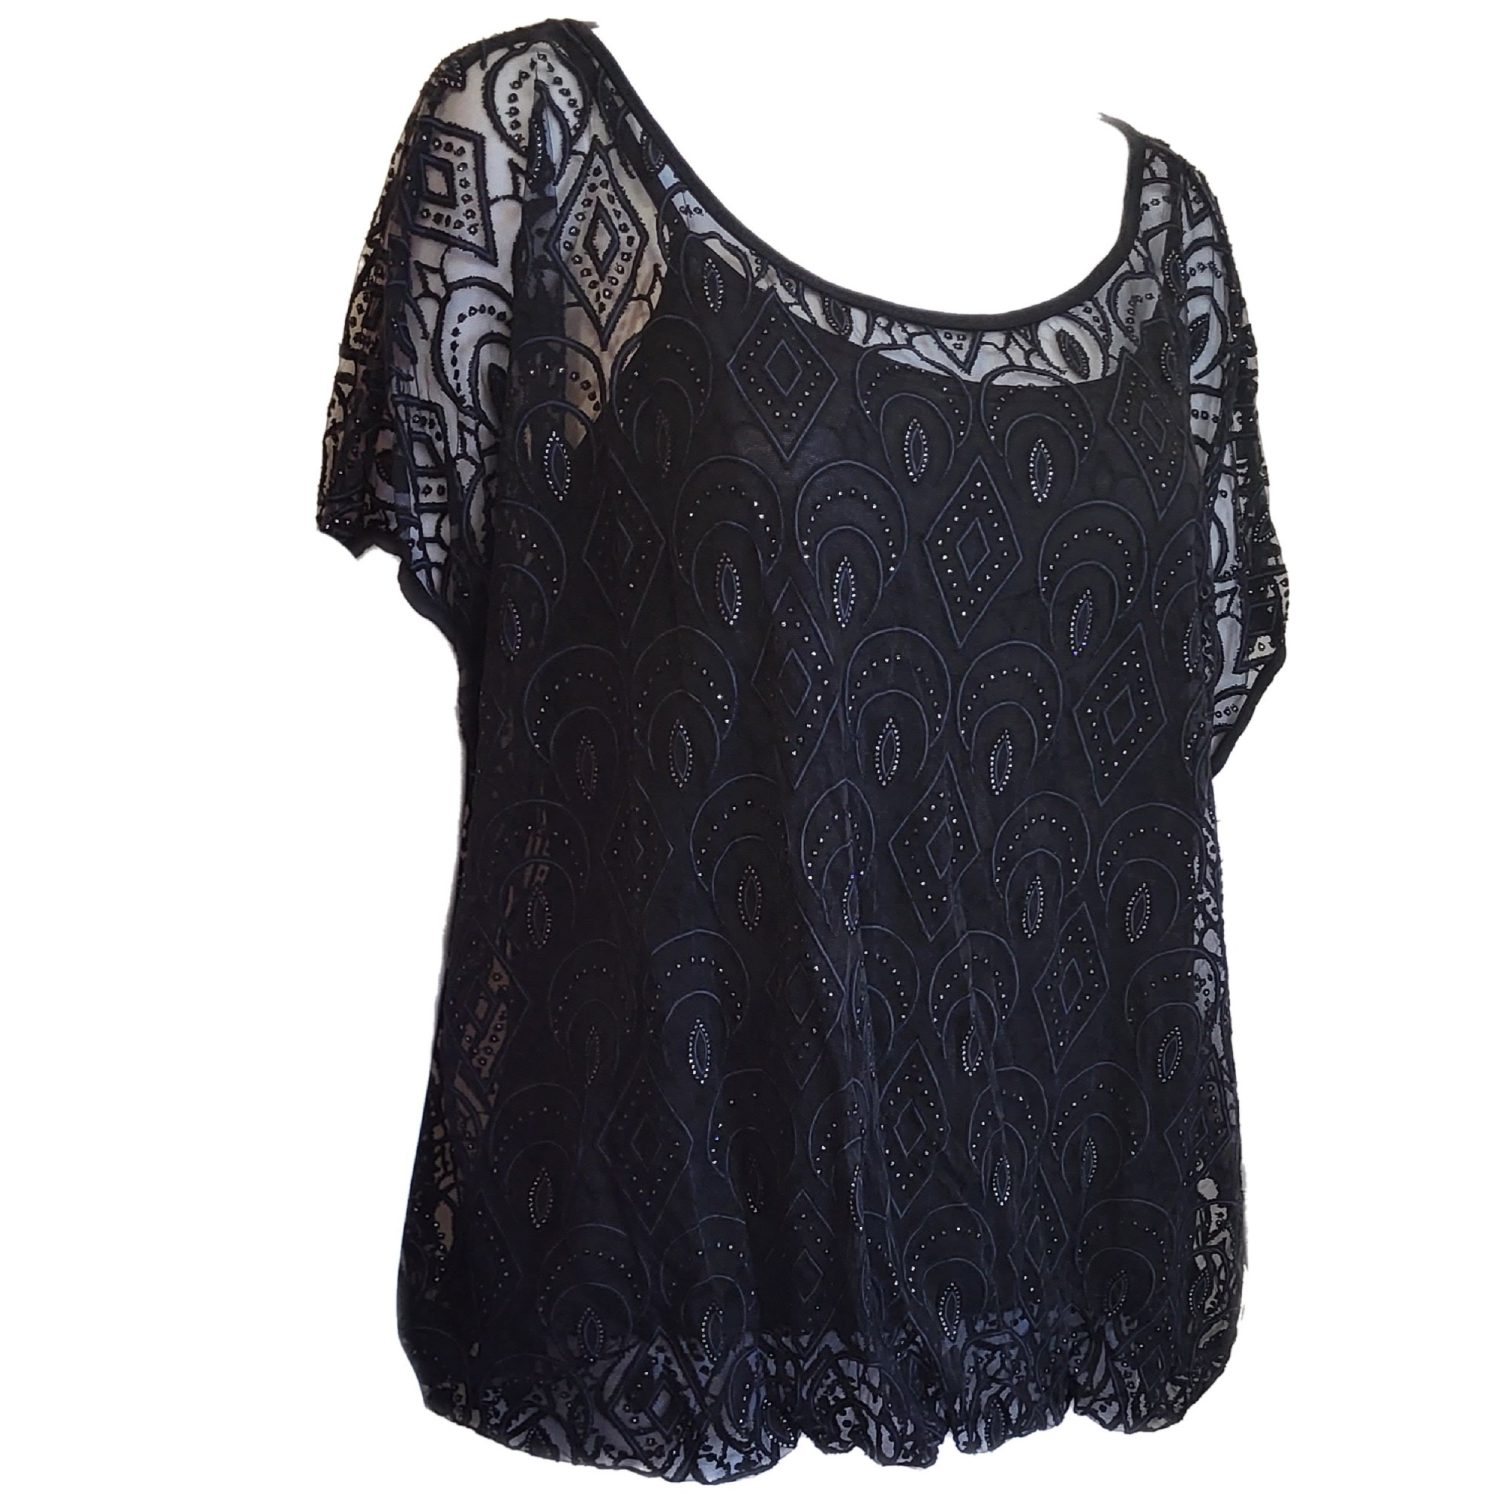 black short sleeved top with attached vest top